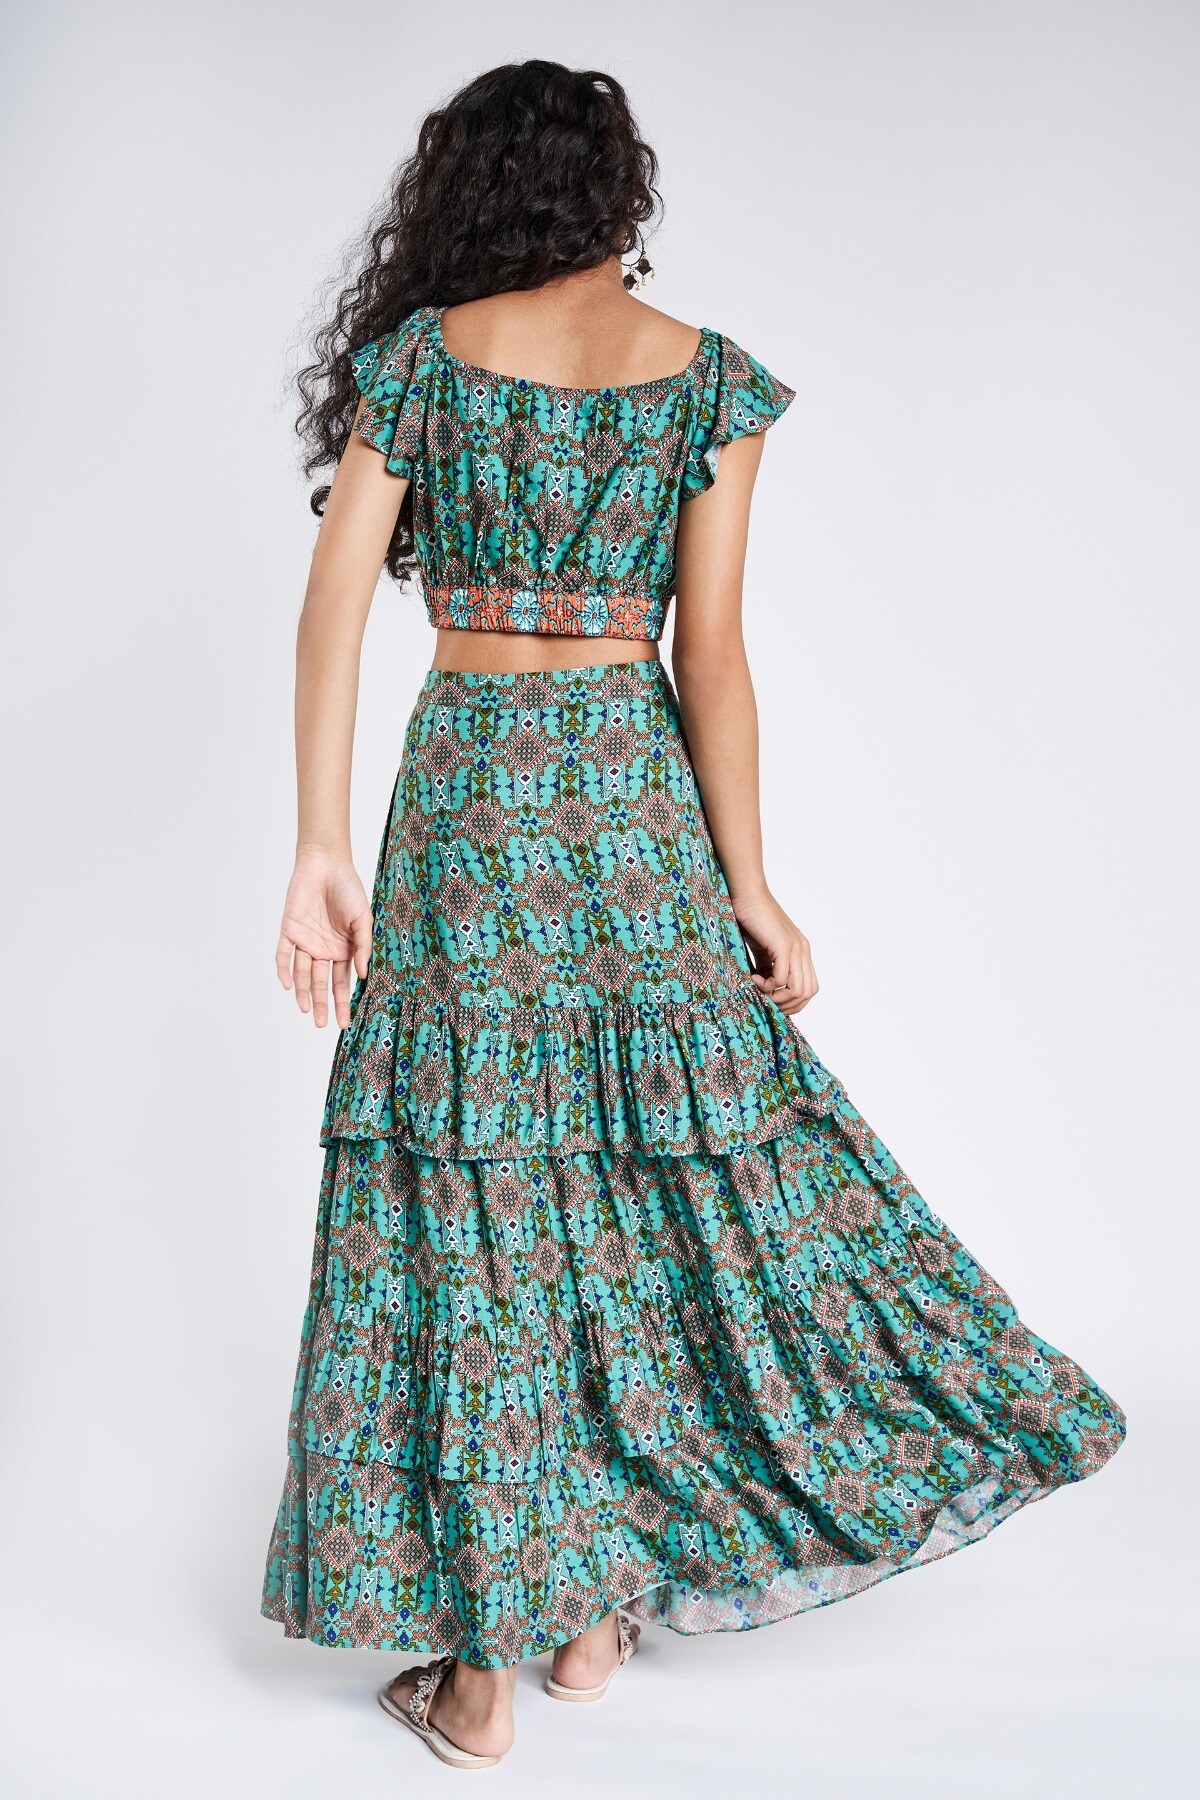 Global Desi | Sage Green Geometric Embroidered Fit And Flare Suit 3